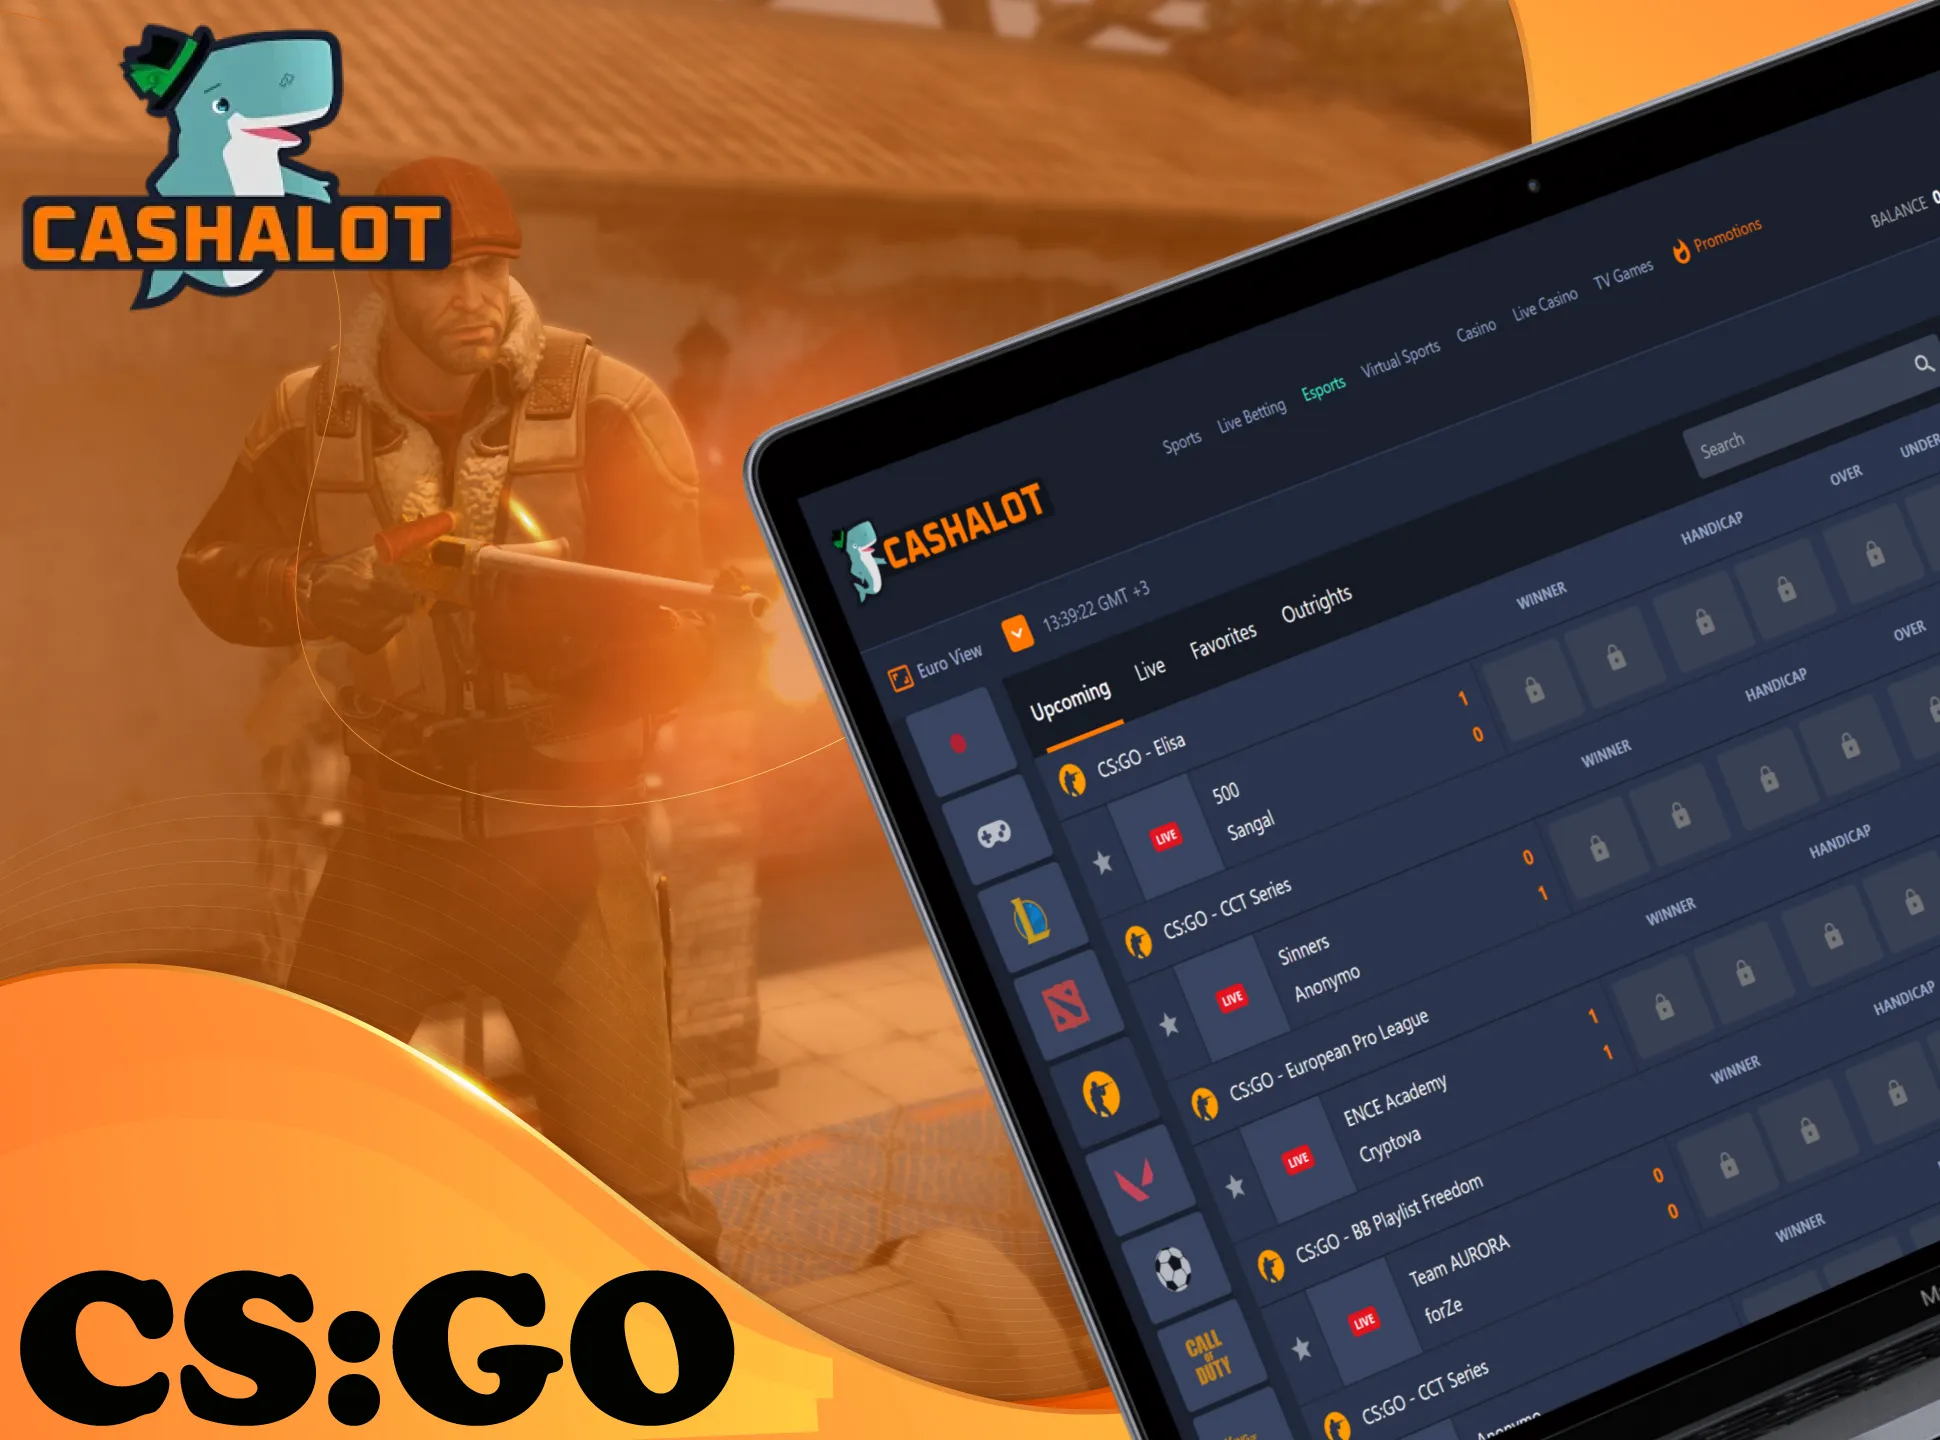 CS:GO is a great esports discipline for betting on at Cashalot.